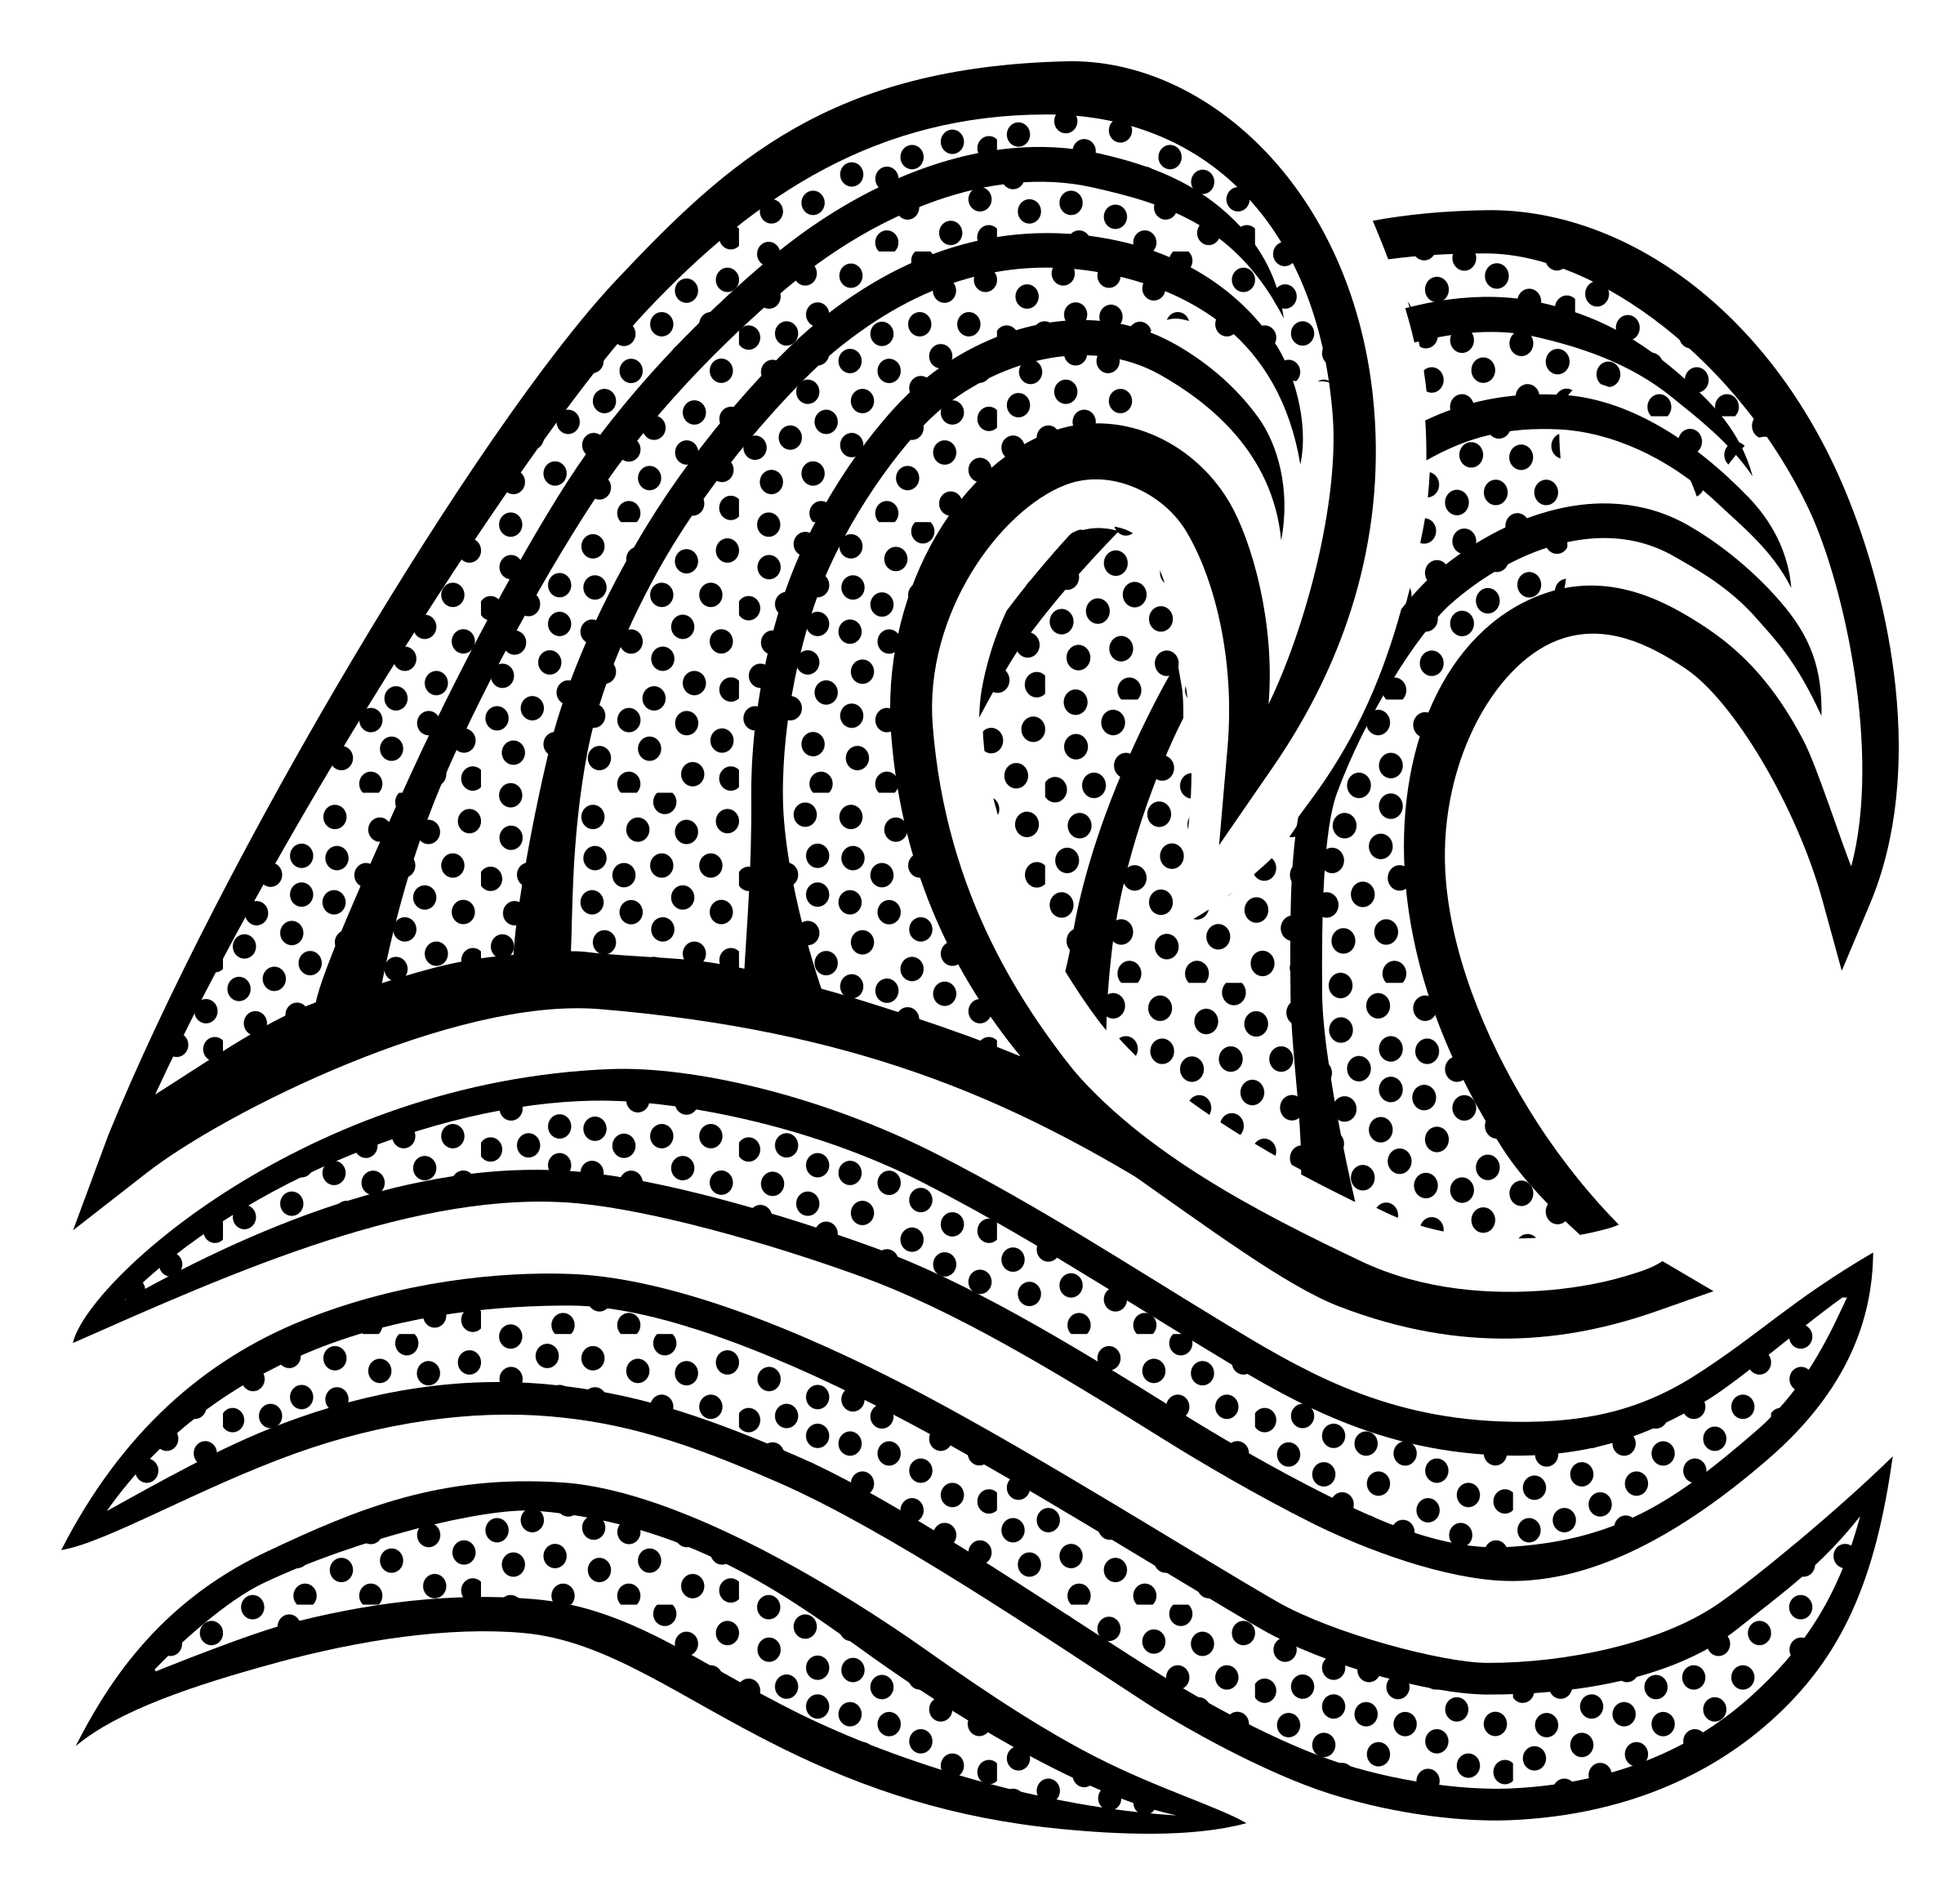 Line drawing at getdrawings. Waves clipart sea wave